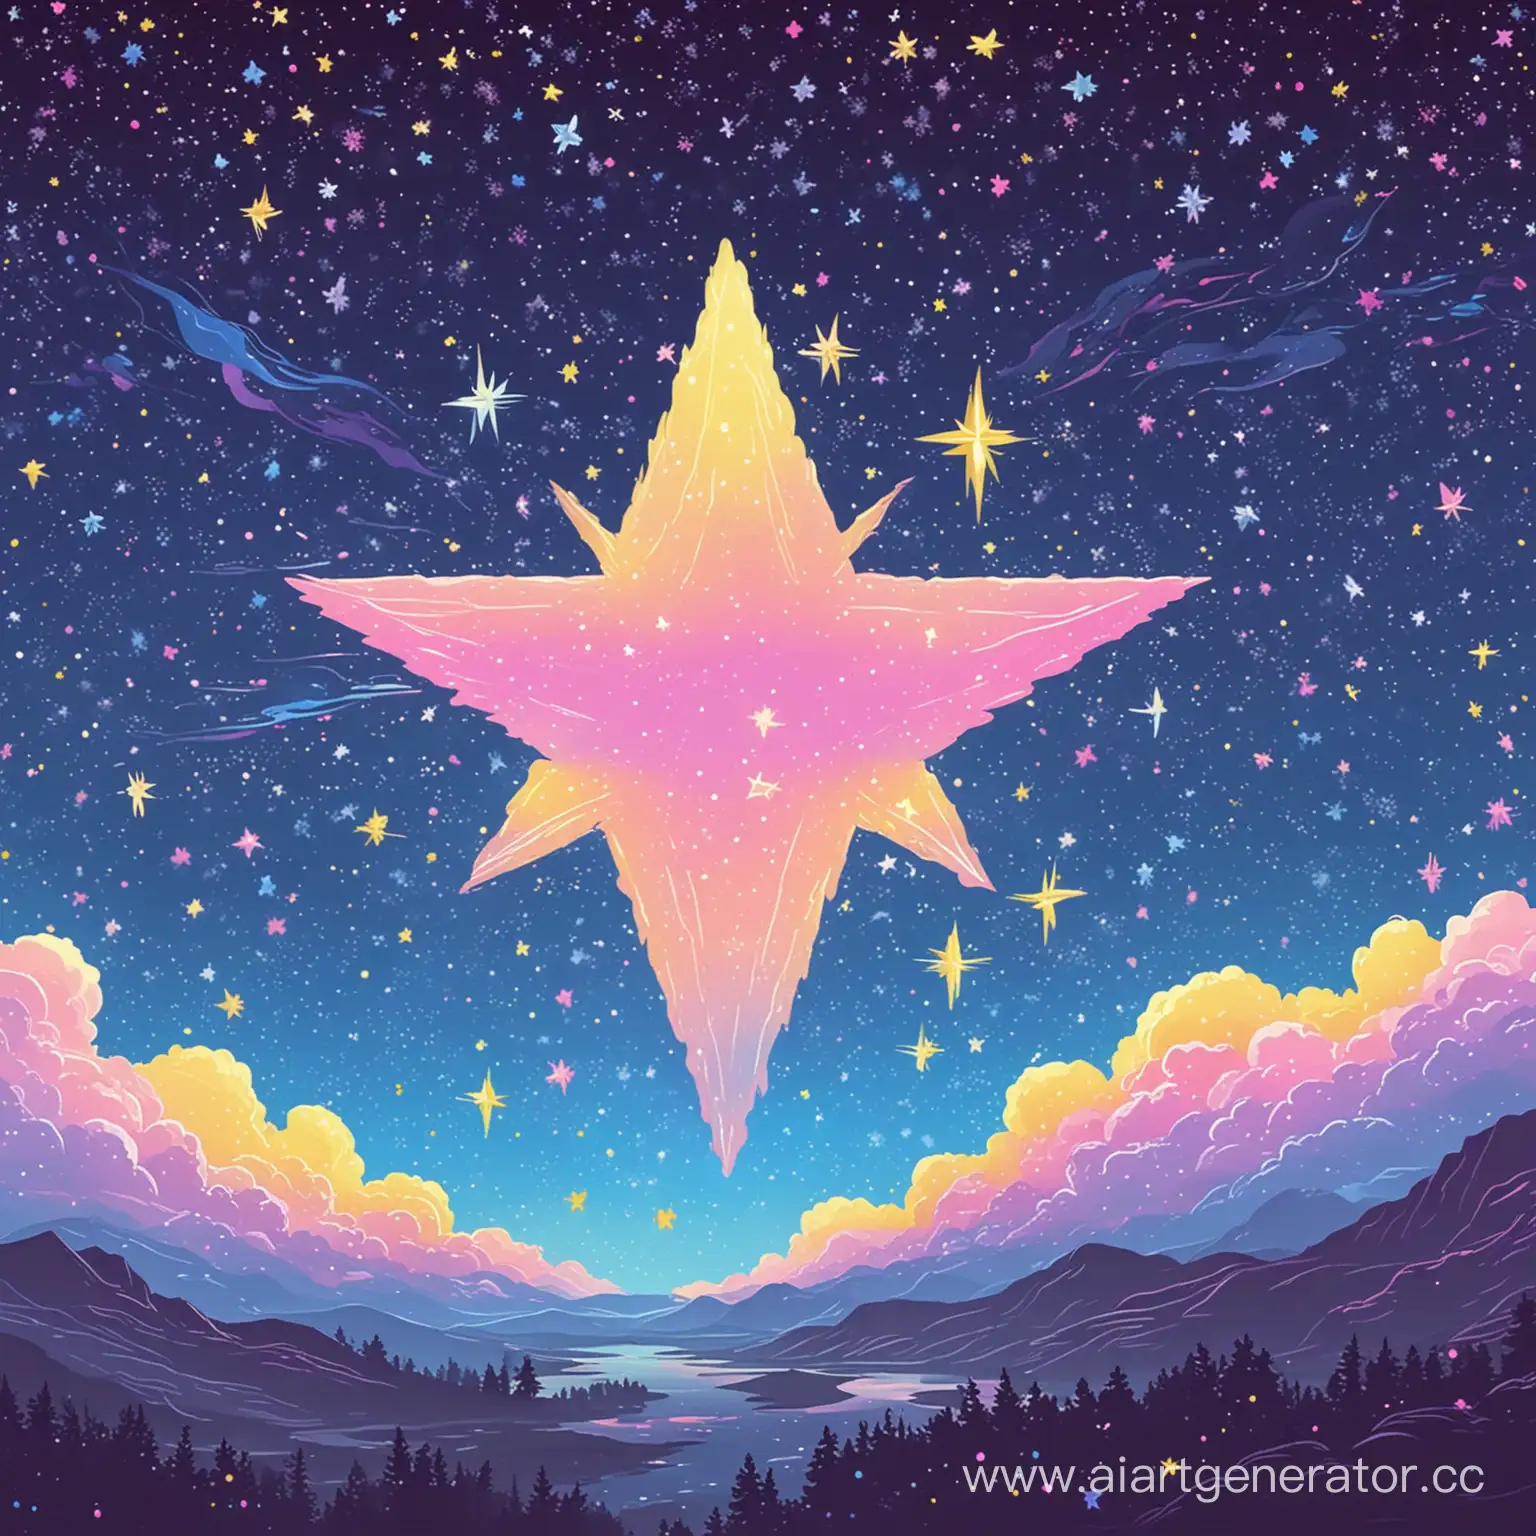 Subtle-Trans-Pride-Starry-Night-Vector-Art-in-Blue-Pink-and-Yellow